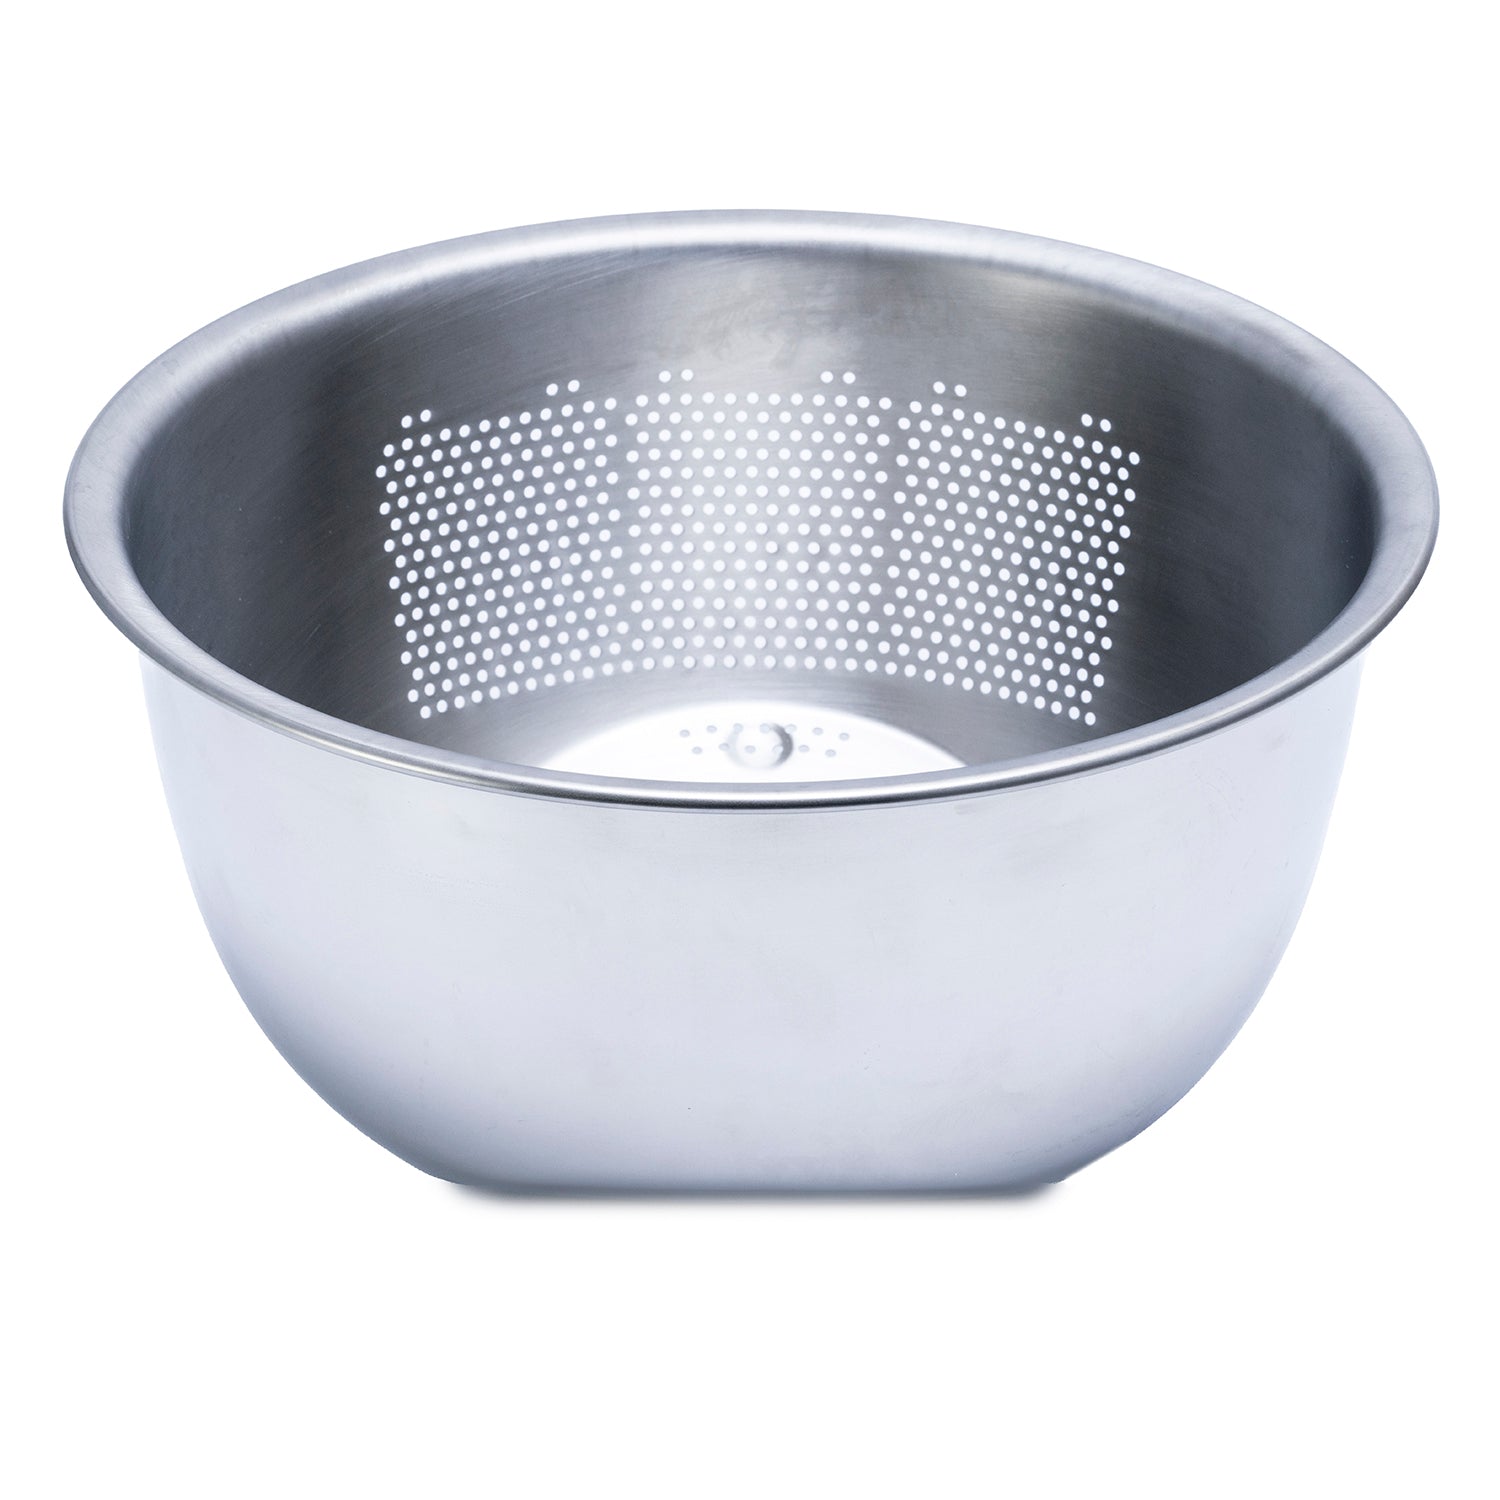 Daiso Japanese Rice Measuring Cup(180cc = 1 Gou Cup) Stainless Steel